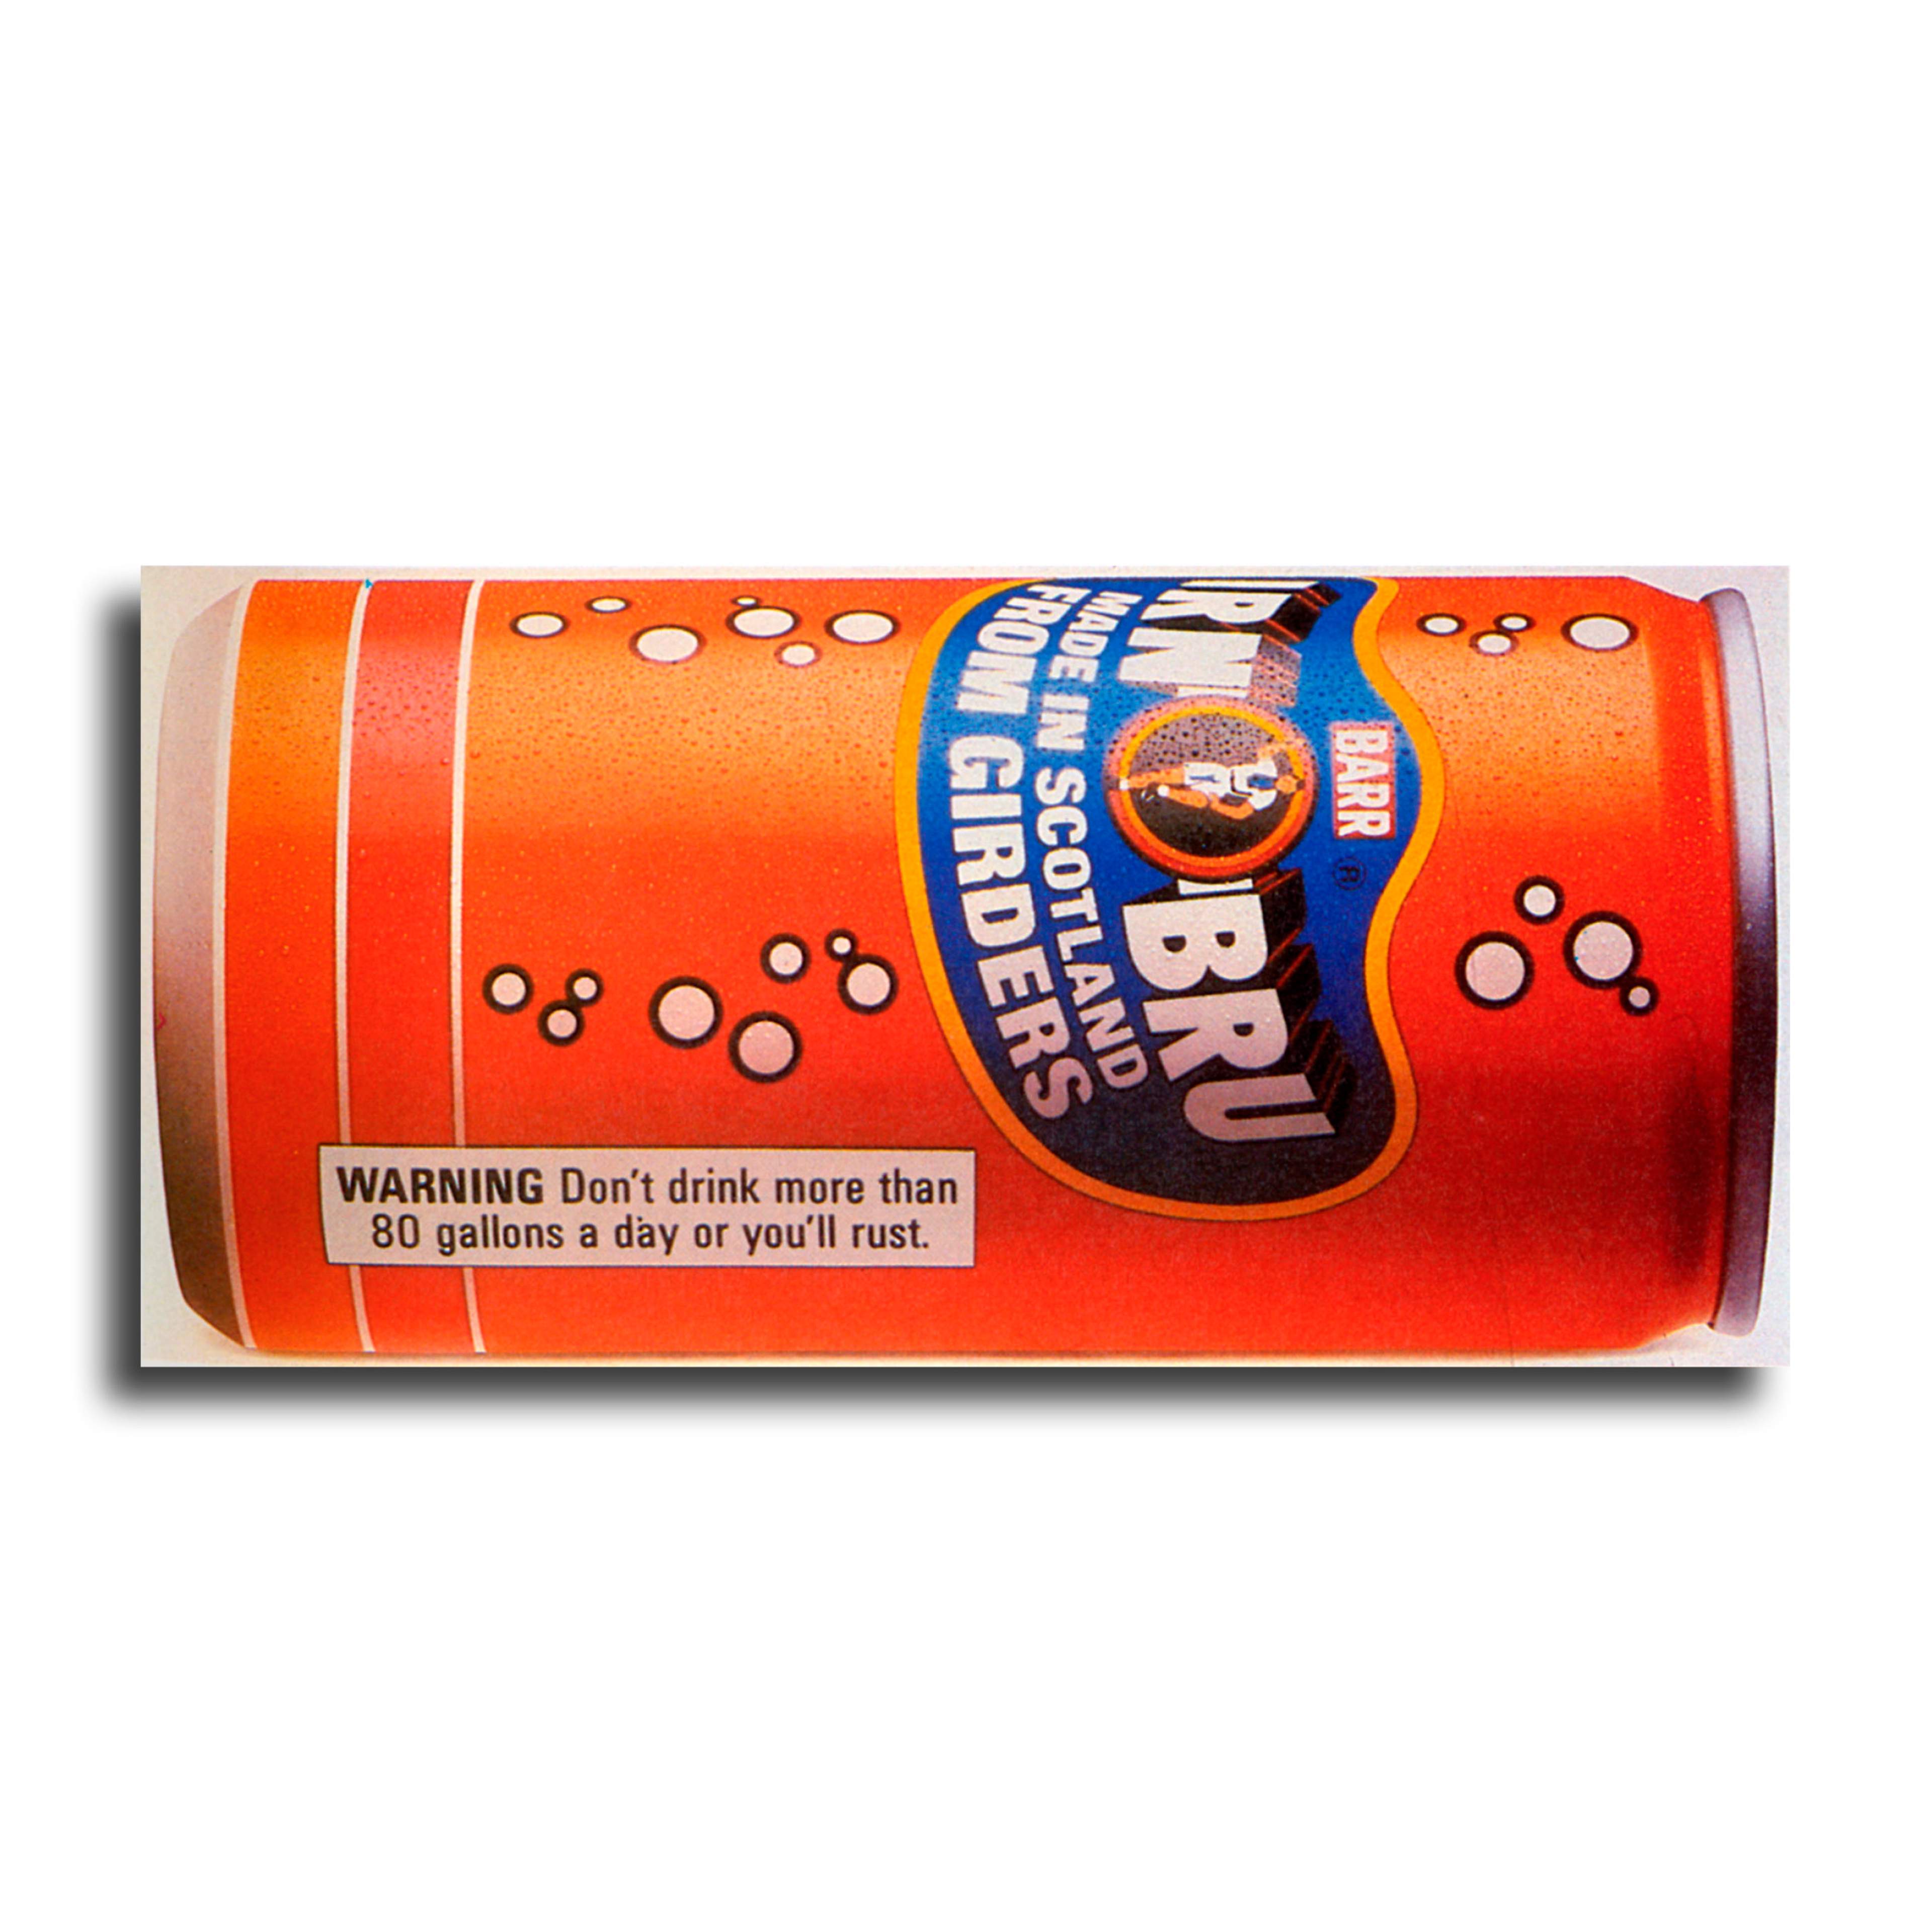 Photograph of a can of Irn Bru telling drinkers they might rust.